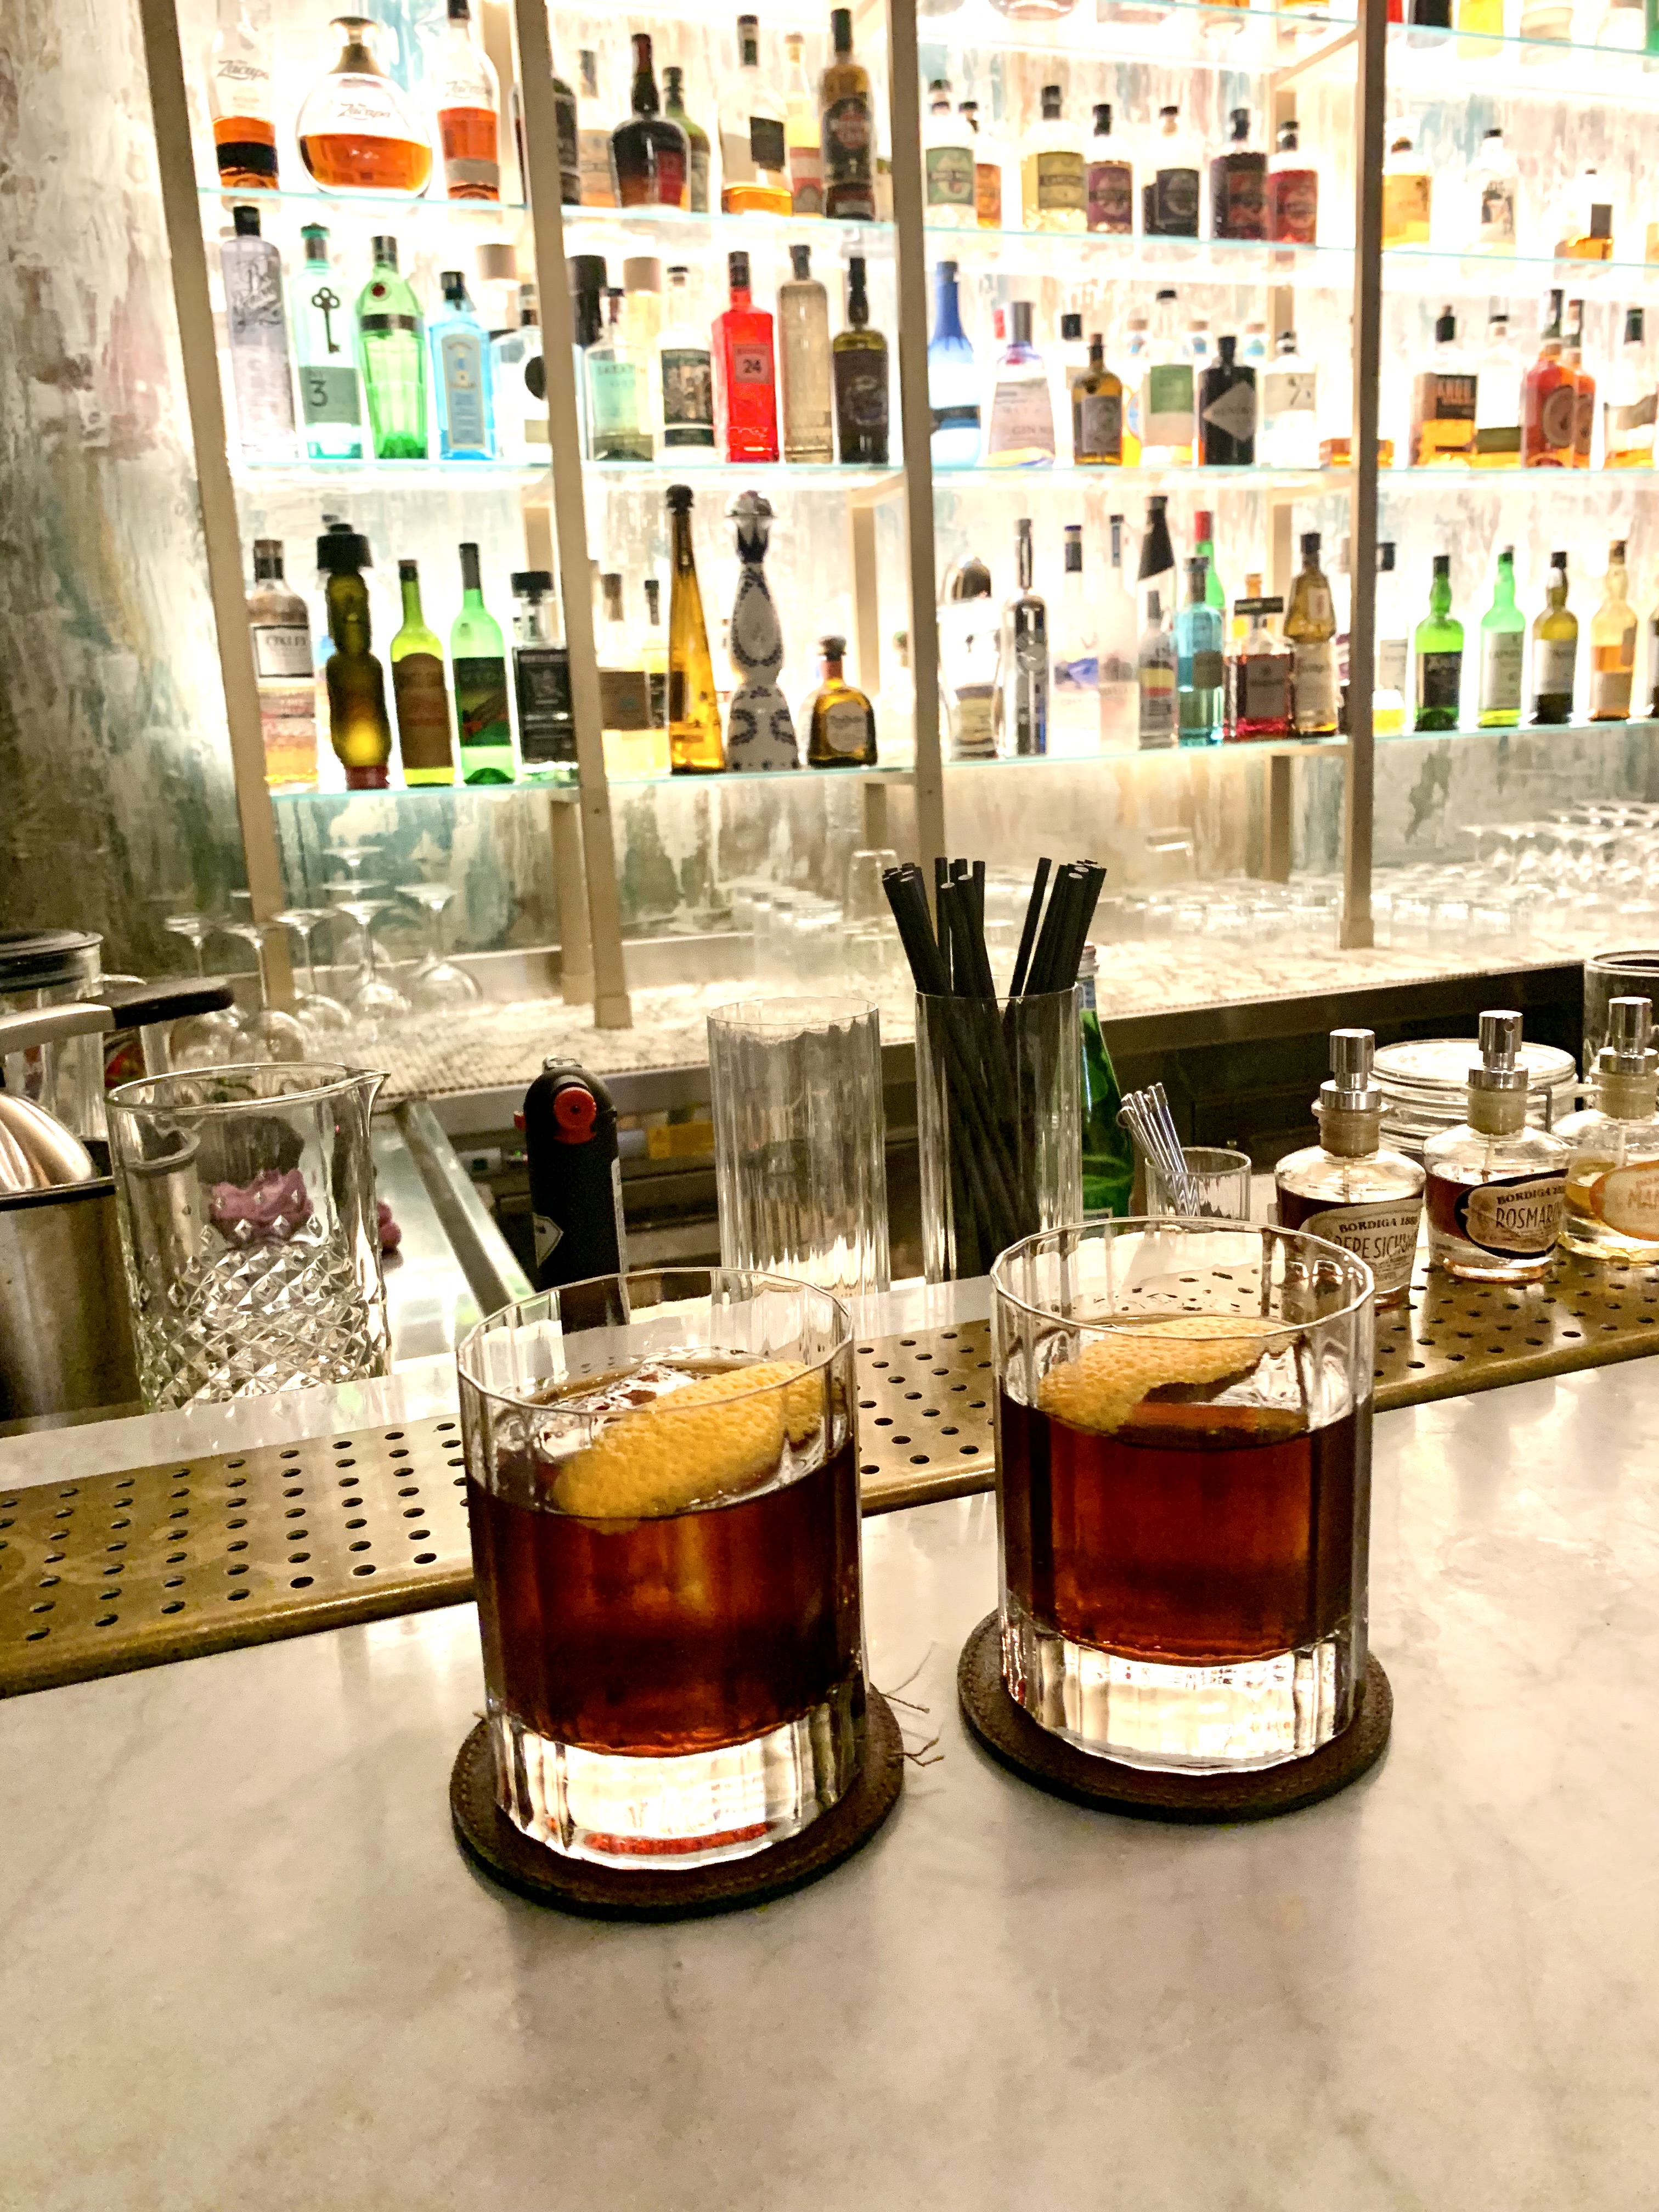 For aperitivo o’clock, make sure to stop by Forte restaurant’s bar